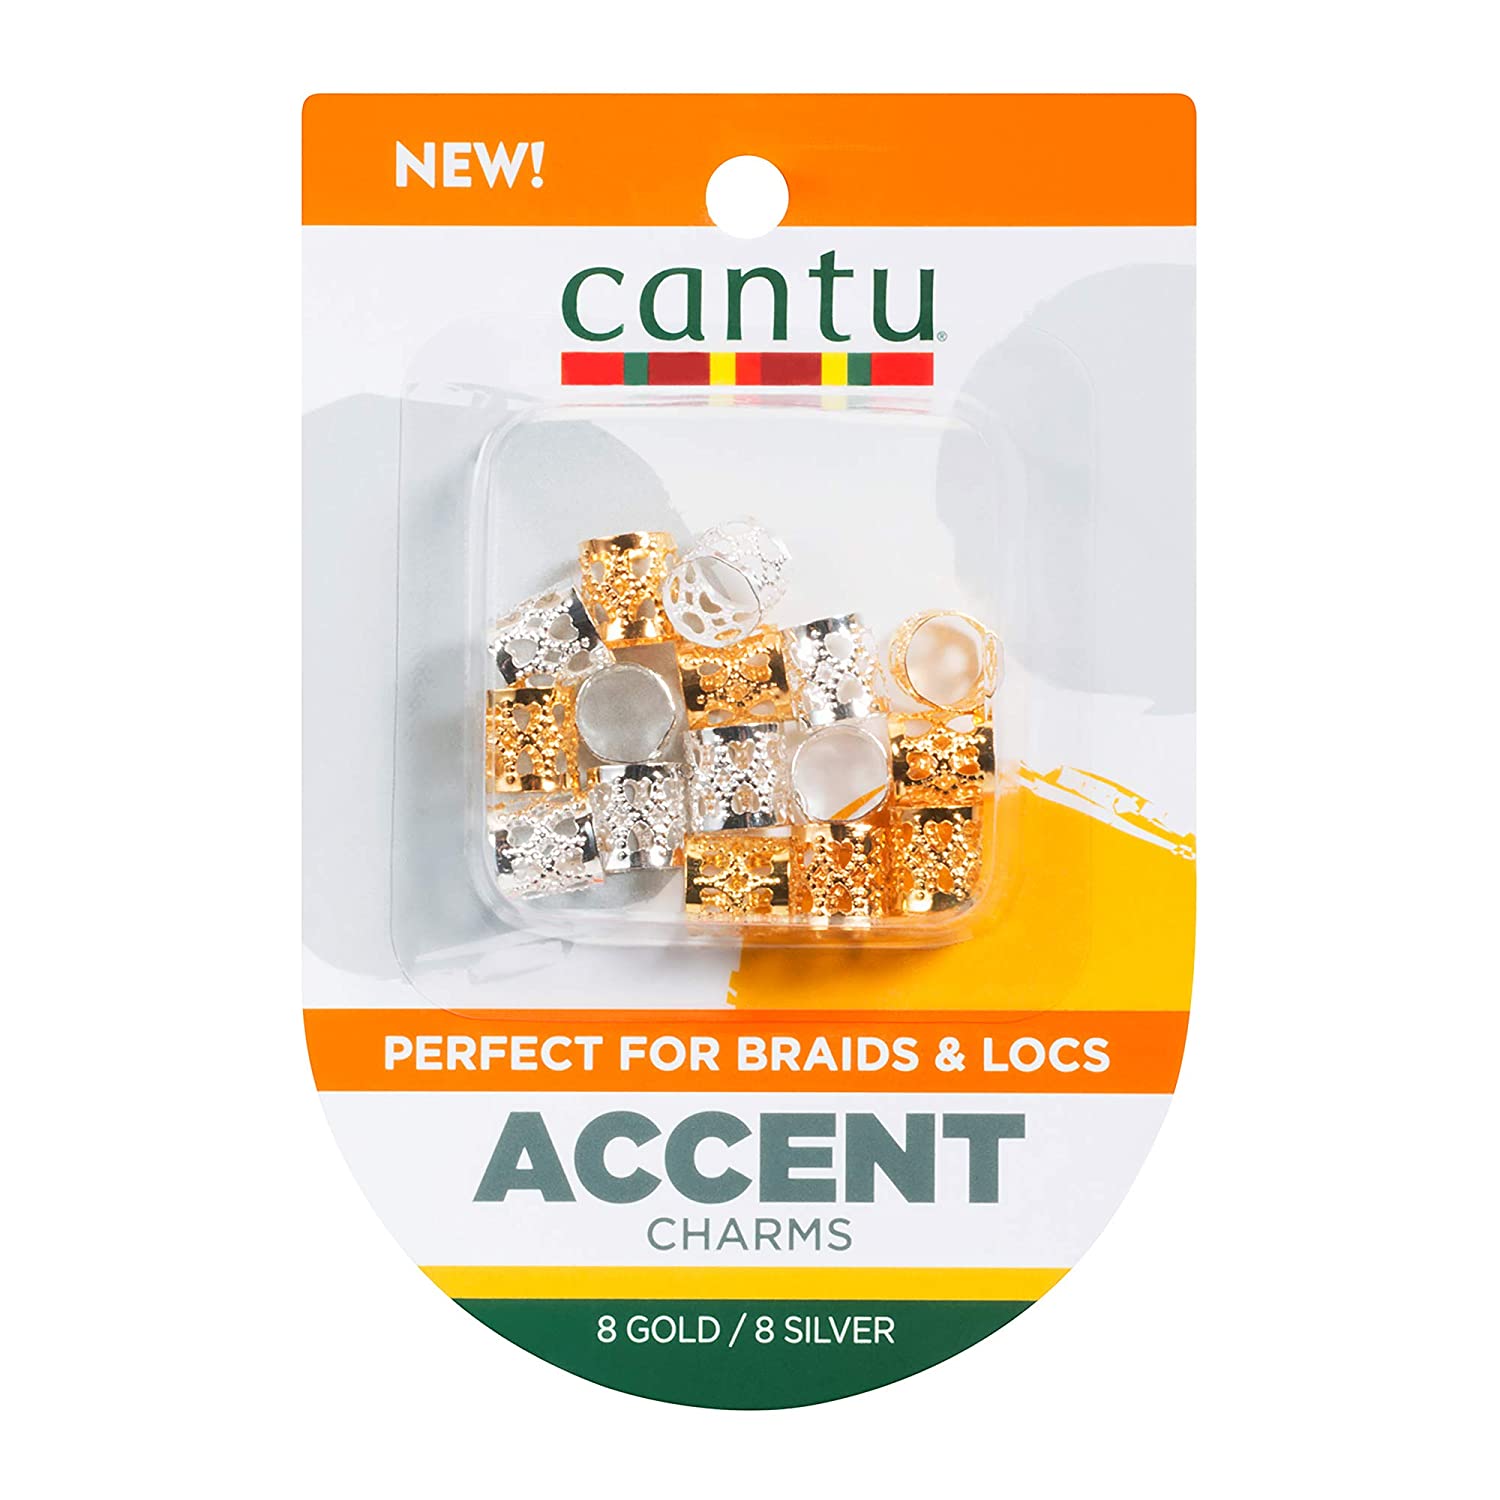 Cantu Accent Charms Gold And Silver - 8ct - 4th Ave Market